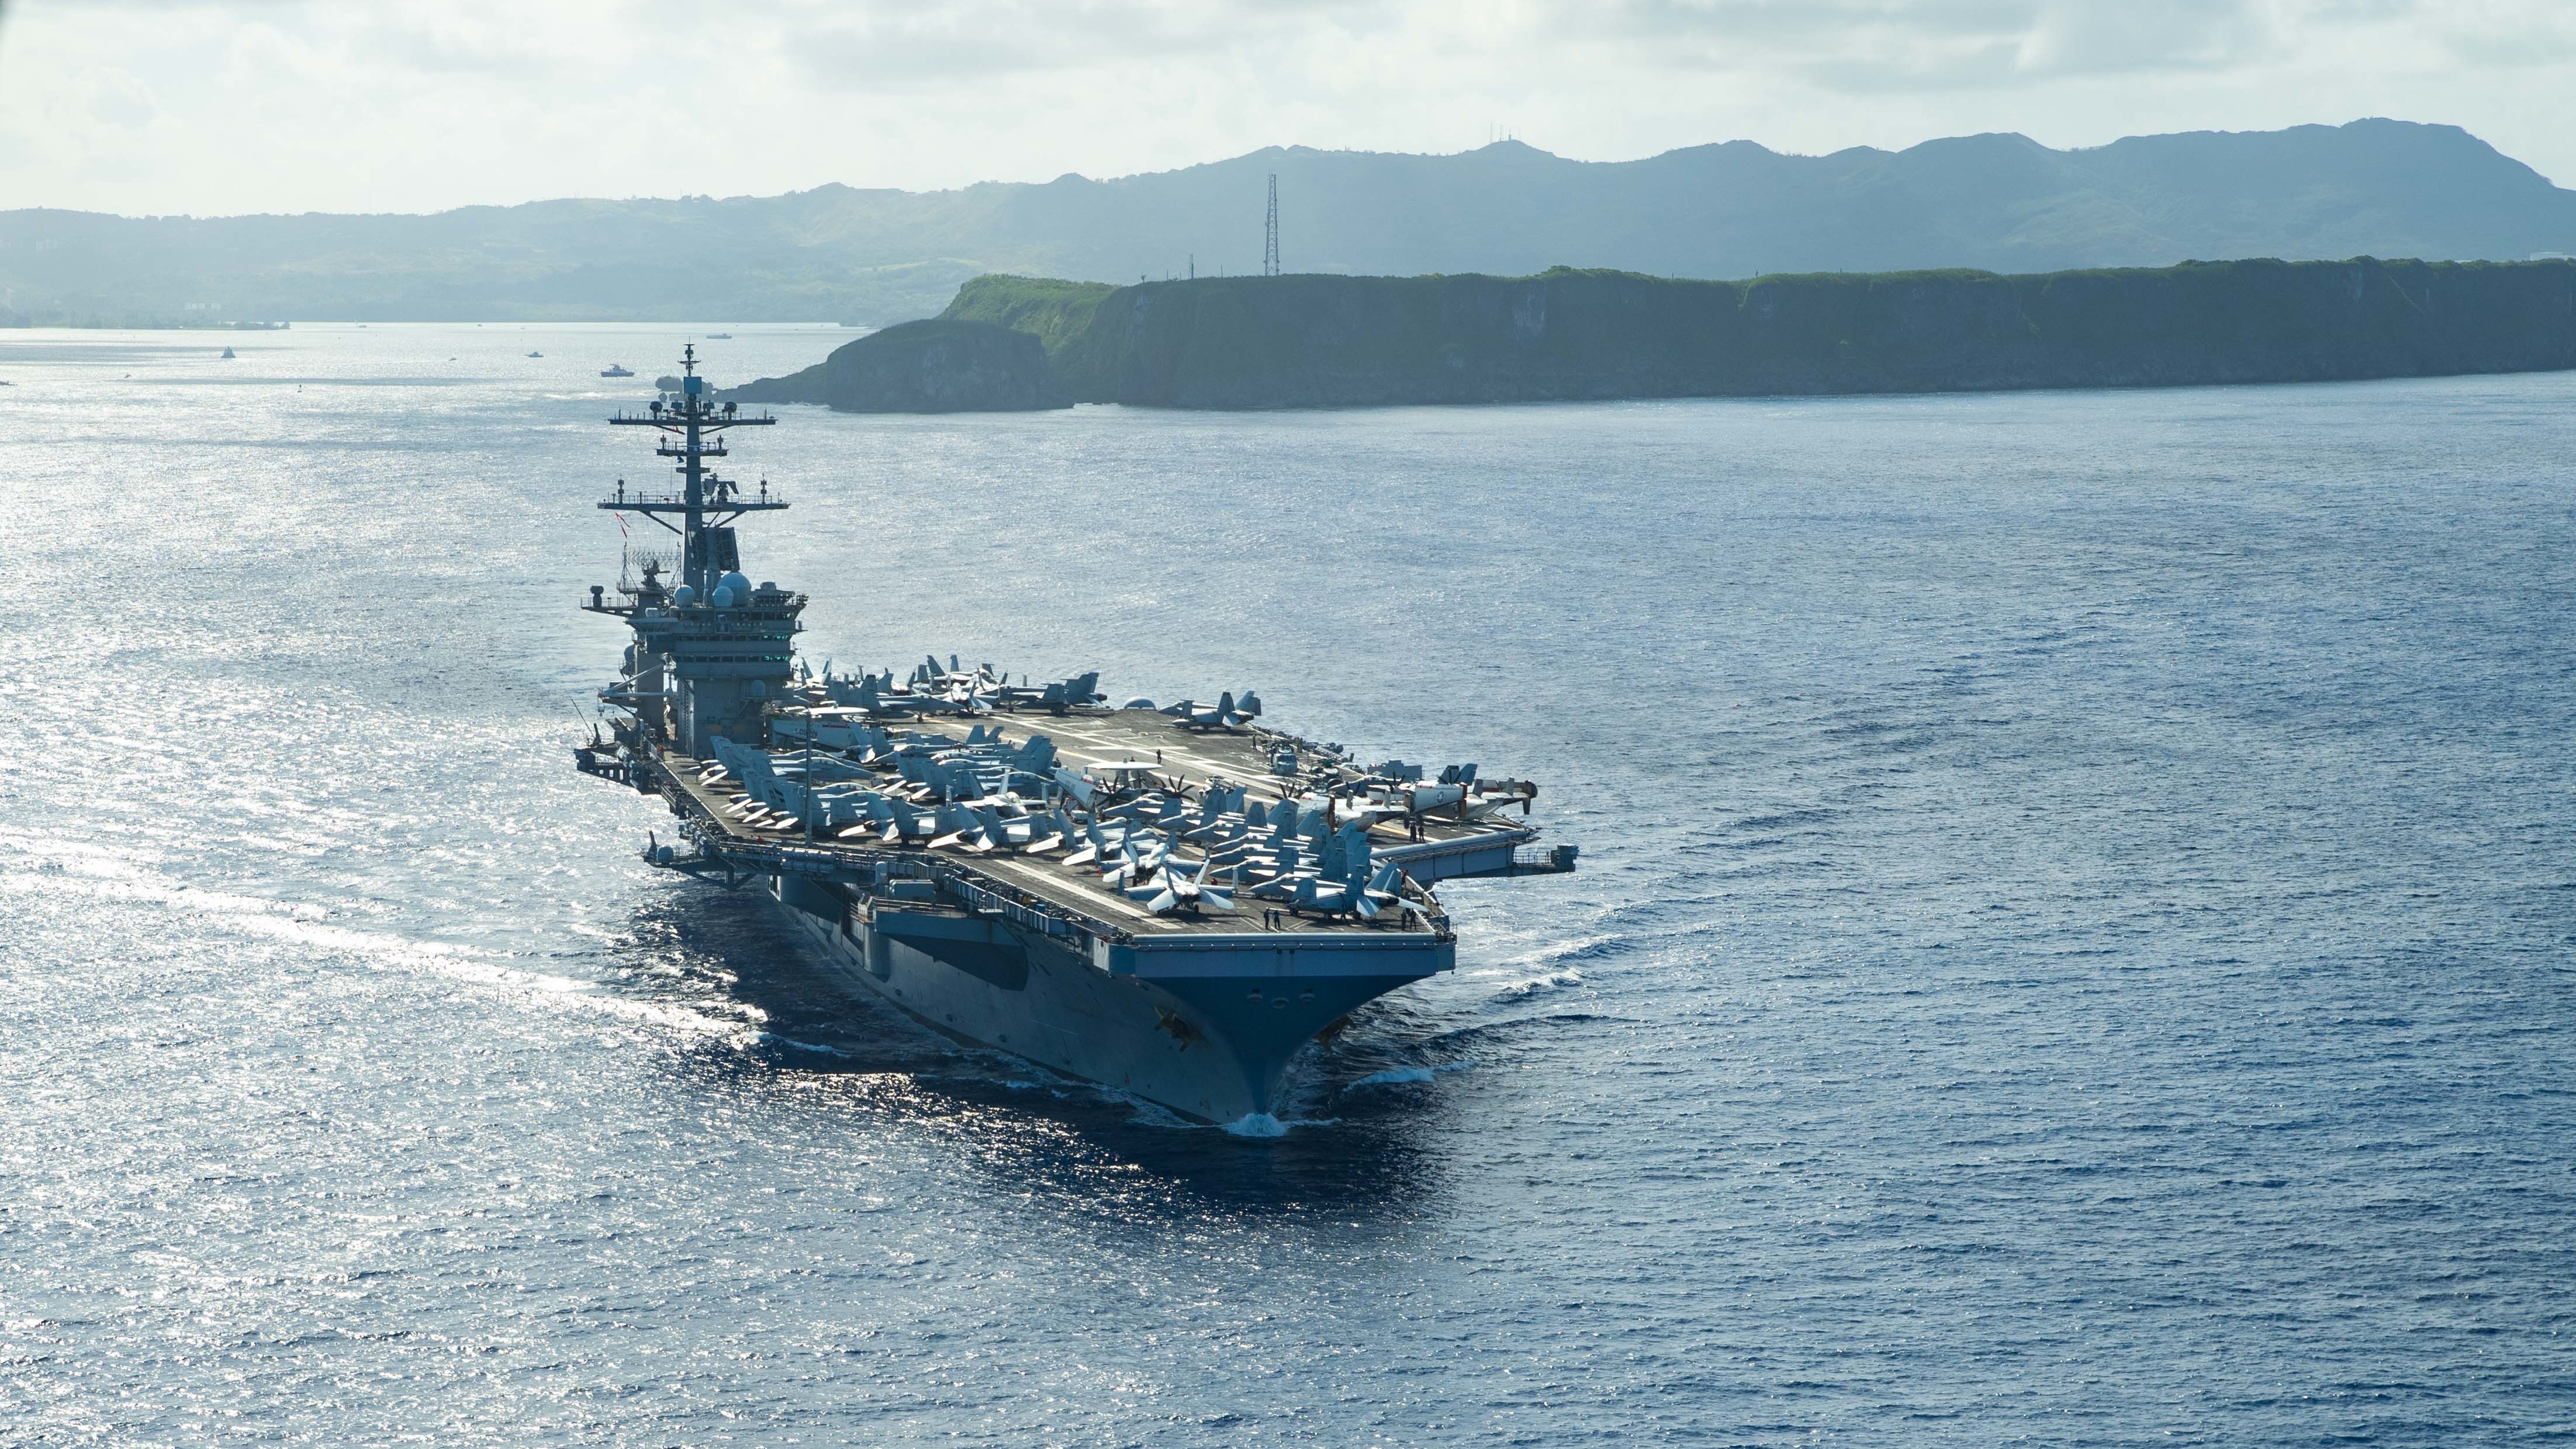 The USS Theodore Roosevelt operates in the Philippine Sea on Thursday following an extended visit to Guam in the midst of the COVID-19 global pandemic. (U.S. Navy photo by Mass Communication Specialist Seaman Kaylianna Genier)